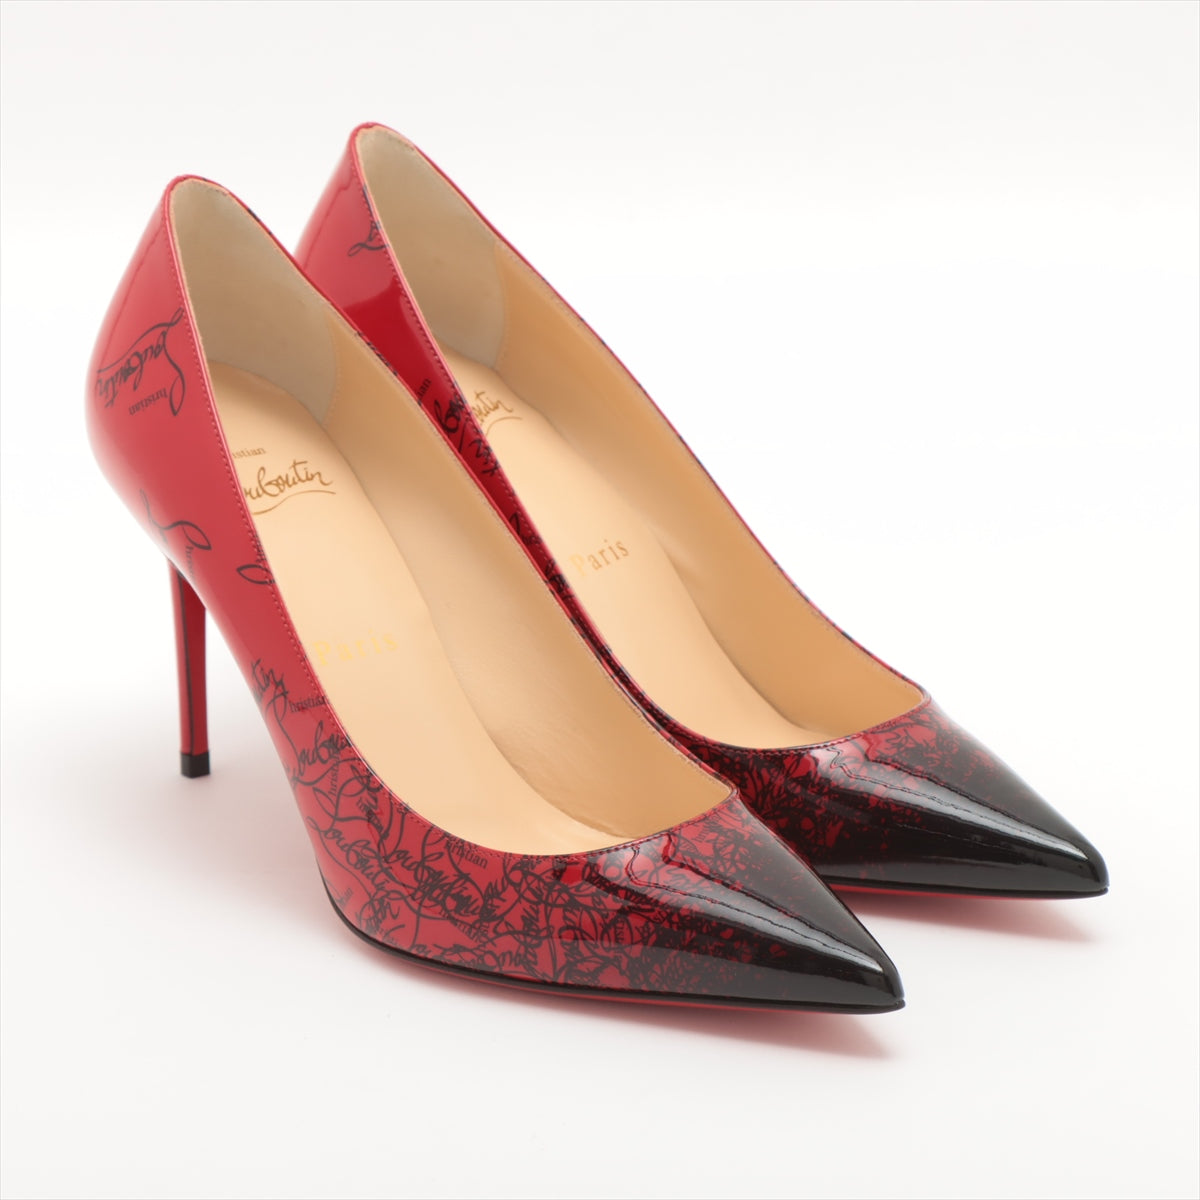 Christian Louboutin Patent leather Pumps 36 1/2 Ladies' Red x Black DECOLLETE 554 DEGRALOUBI box sack There is a replacement lift